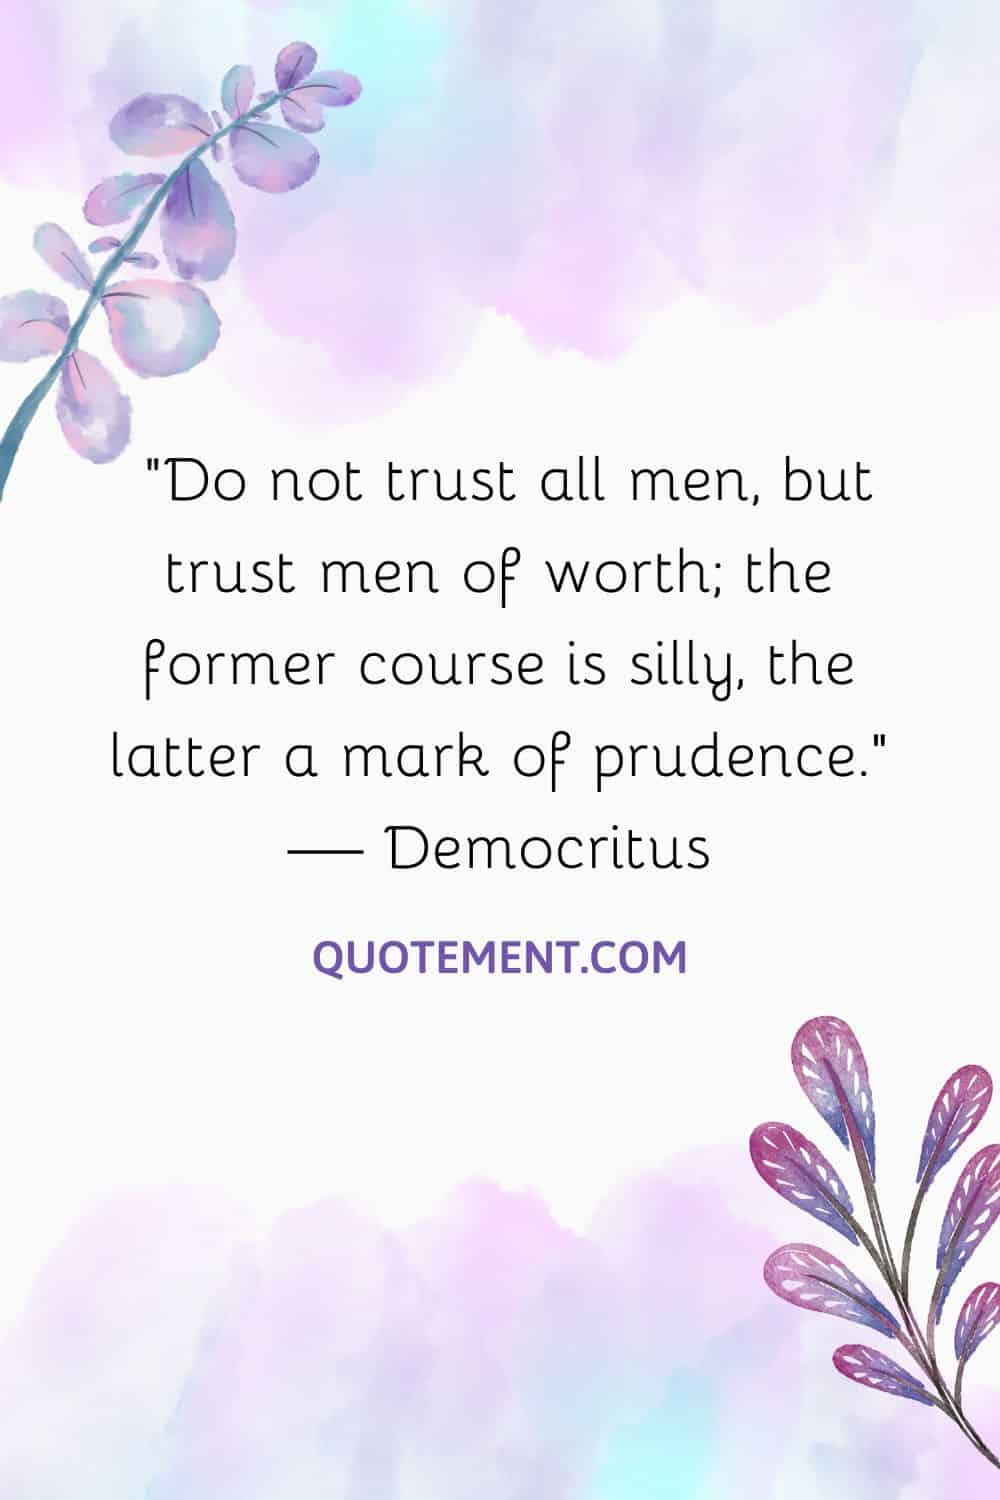 purple flowers image representing the greatest trust quote
